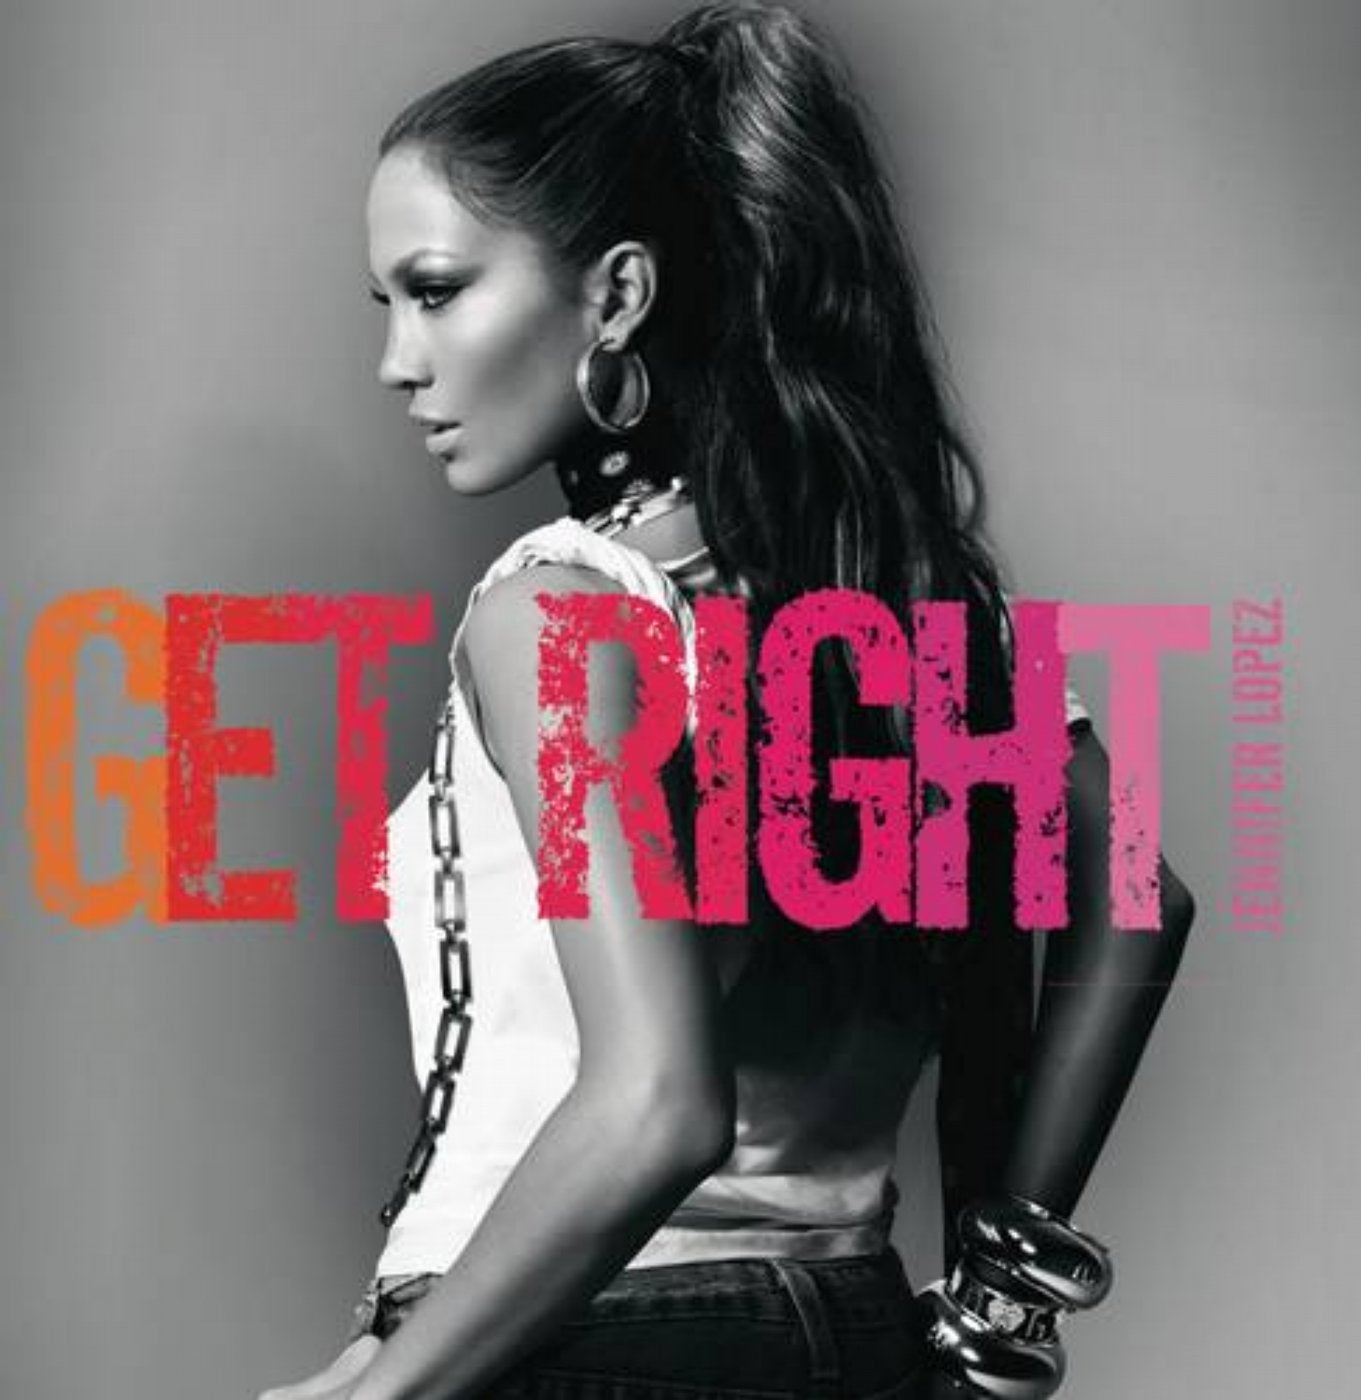 Get Right Remix EP